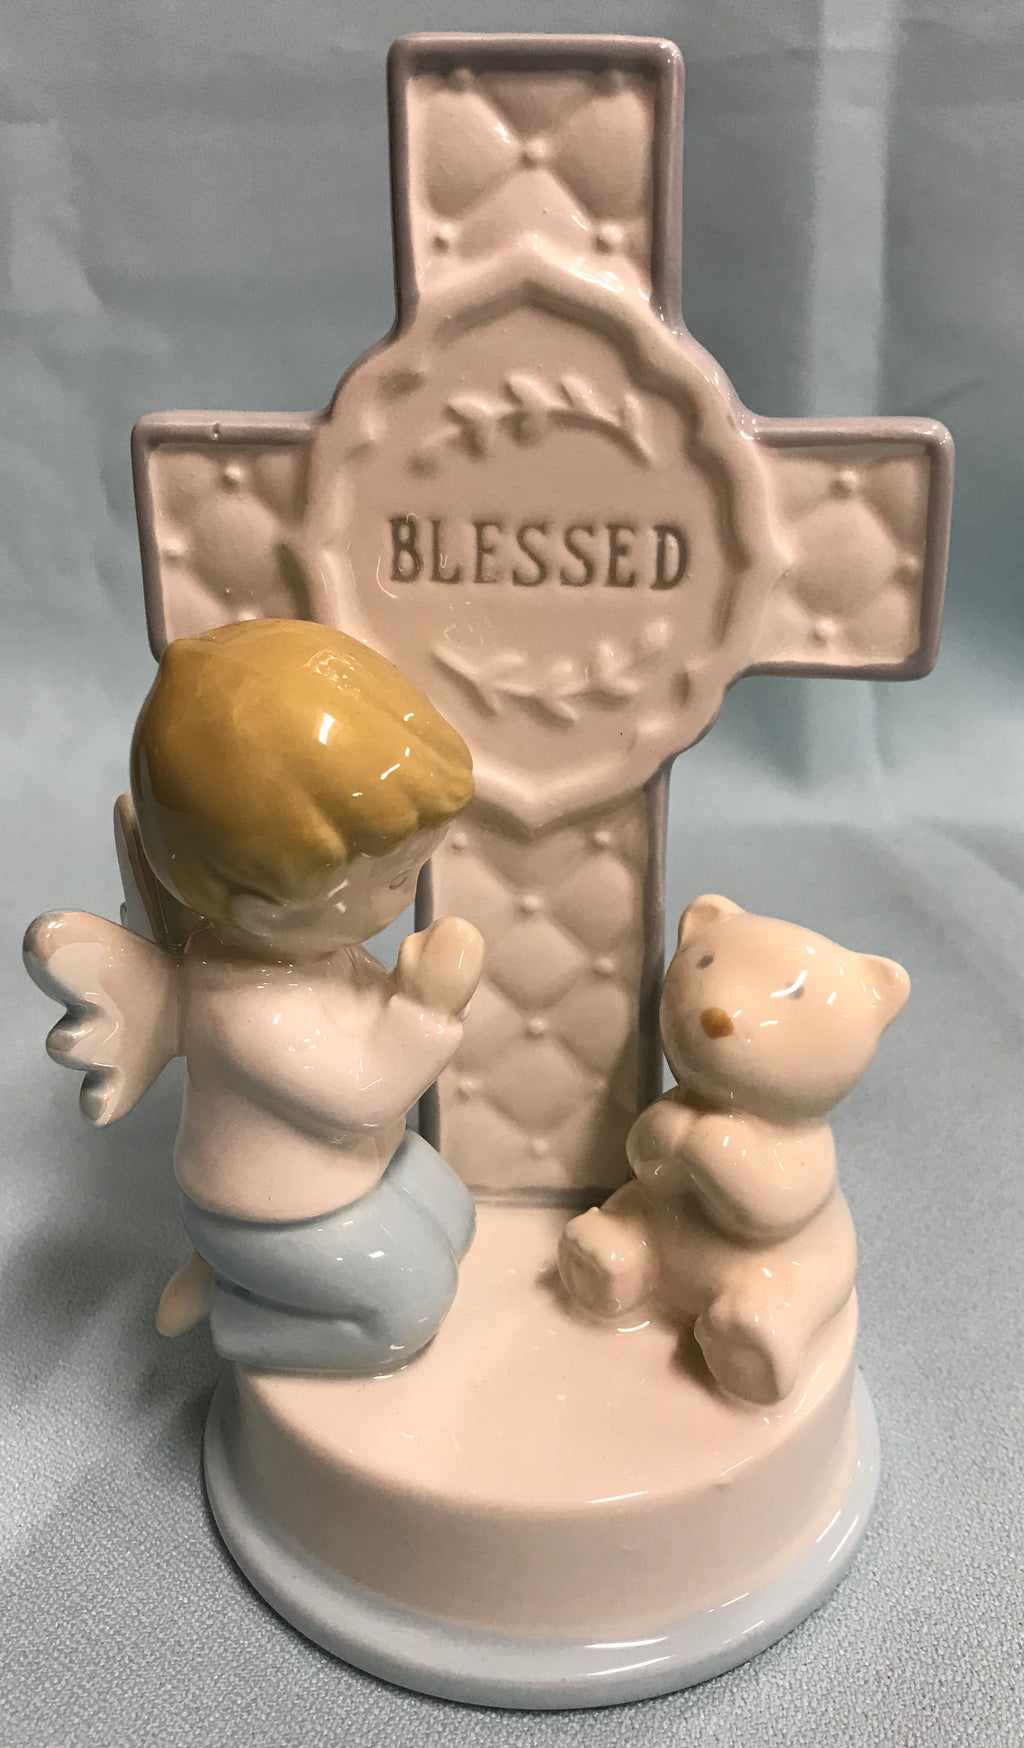 CROSS "BLESSED" FOR BOY